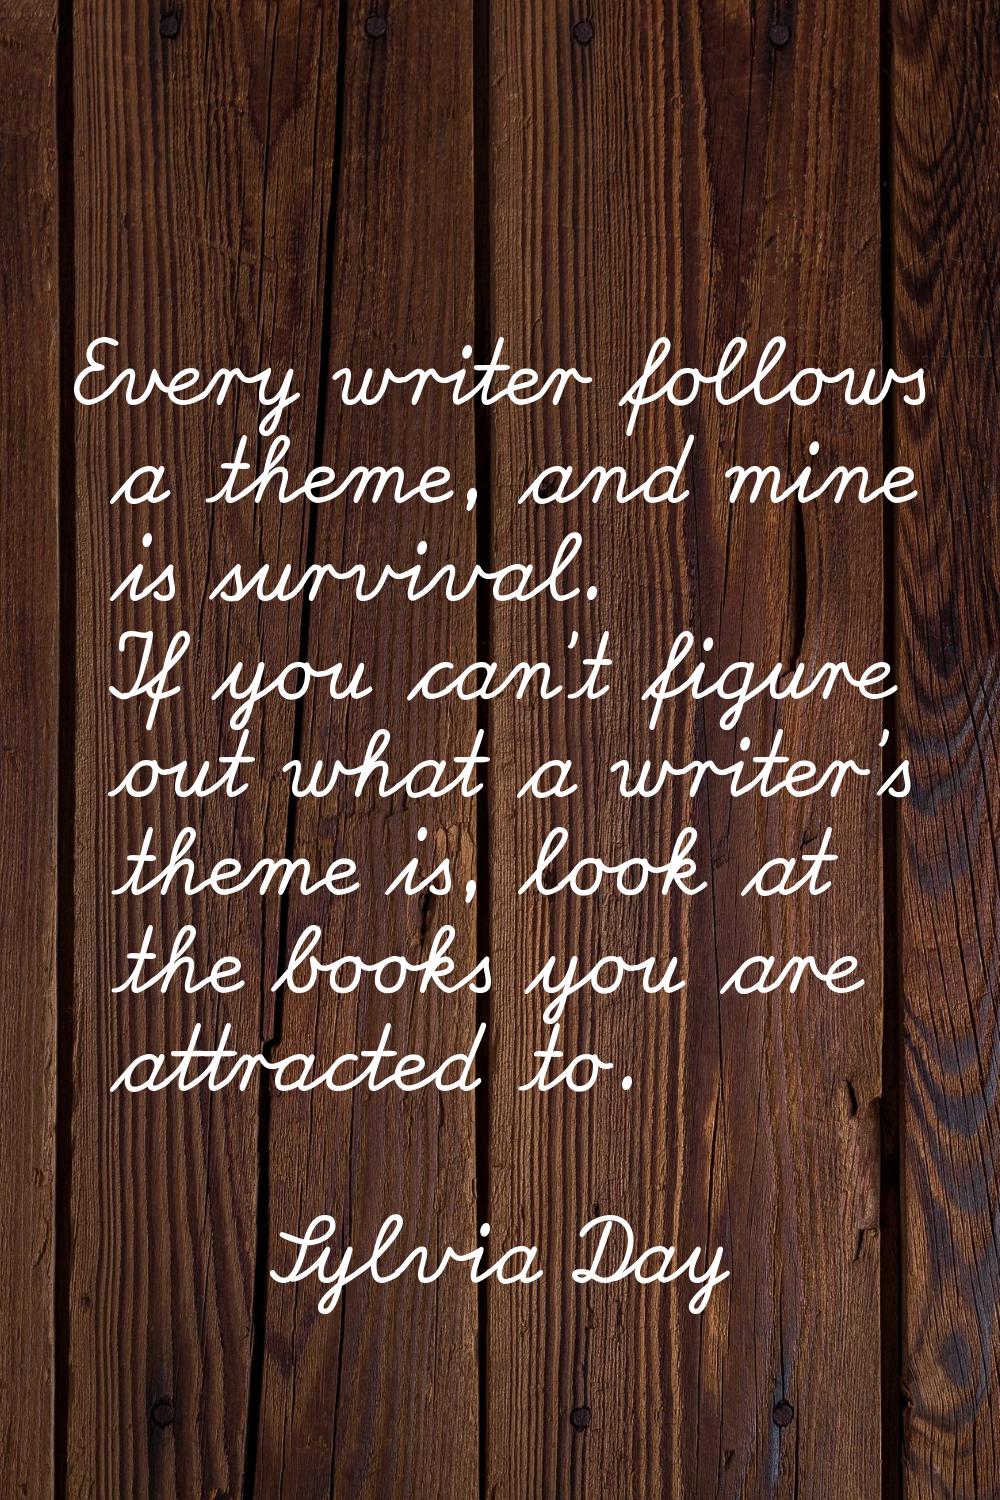 Every writer follows a theme, and mine is survival. If you can't figure out what a writer's theme i